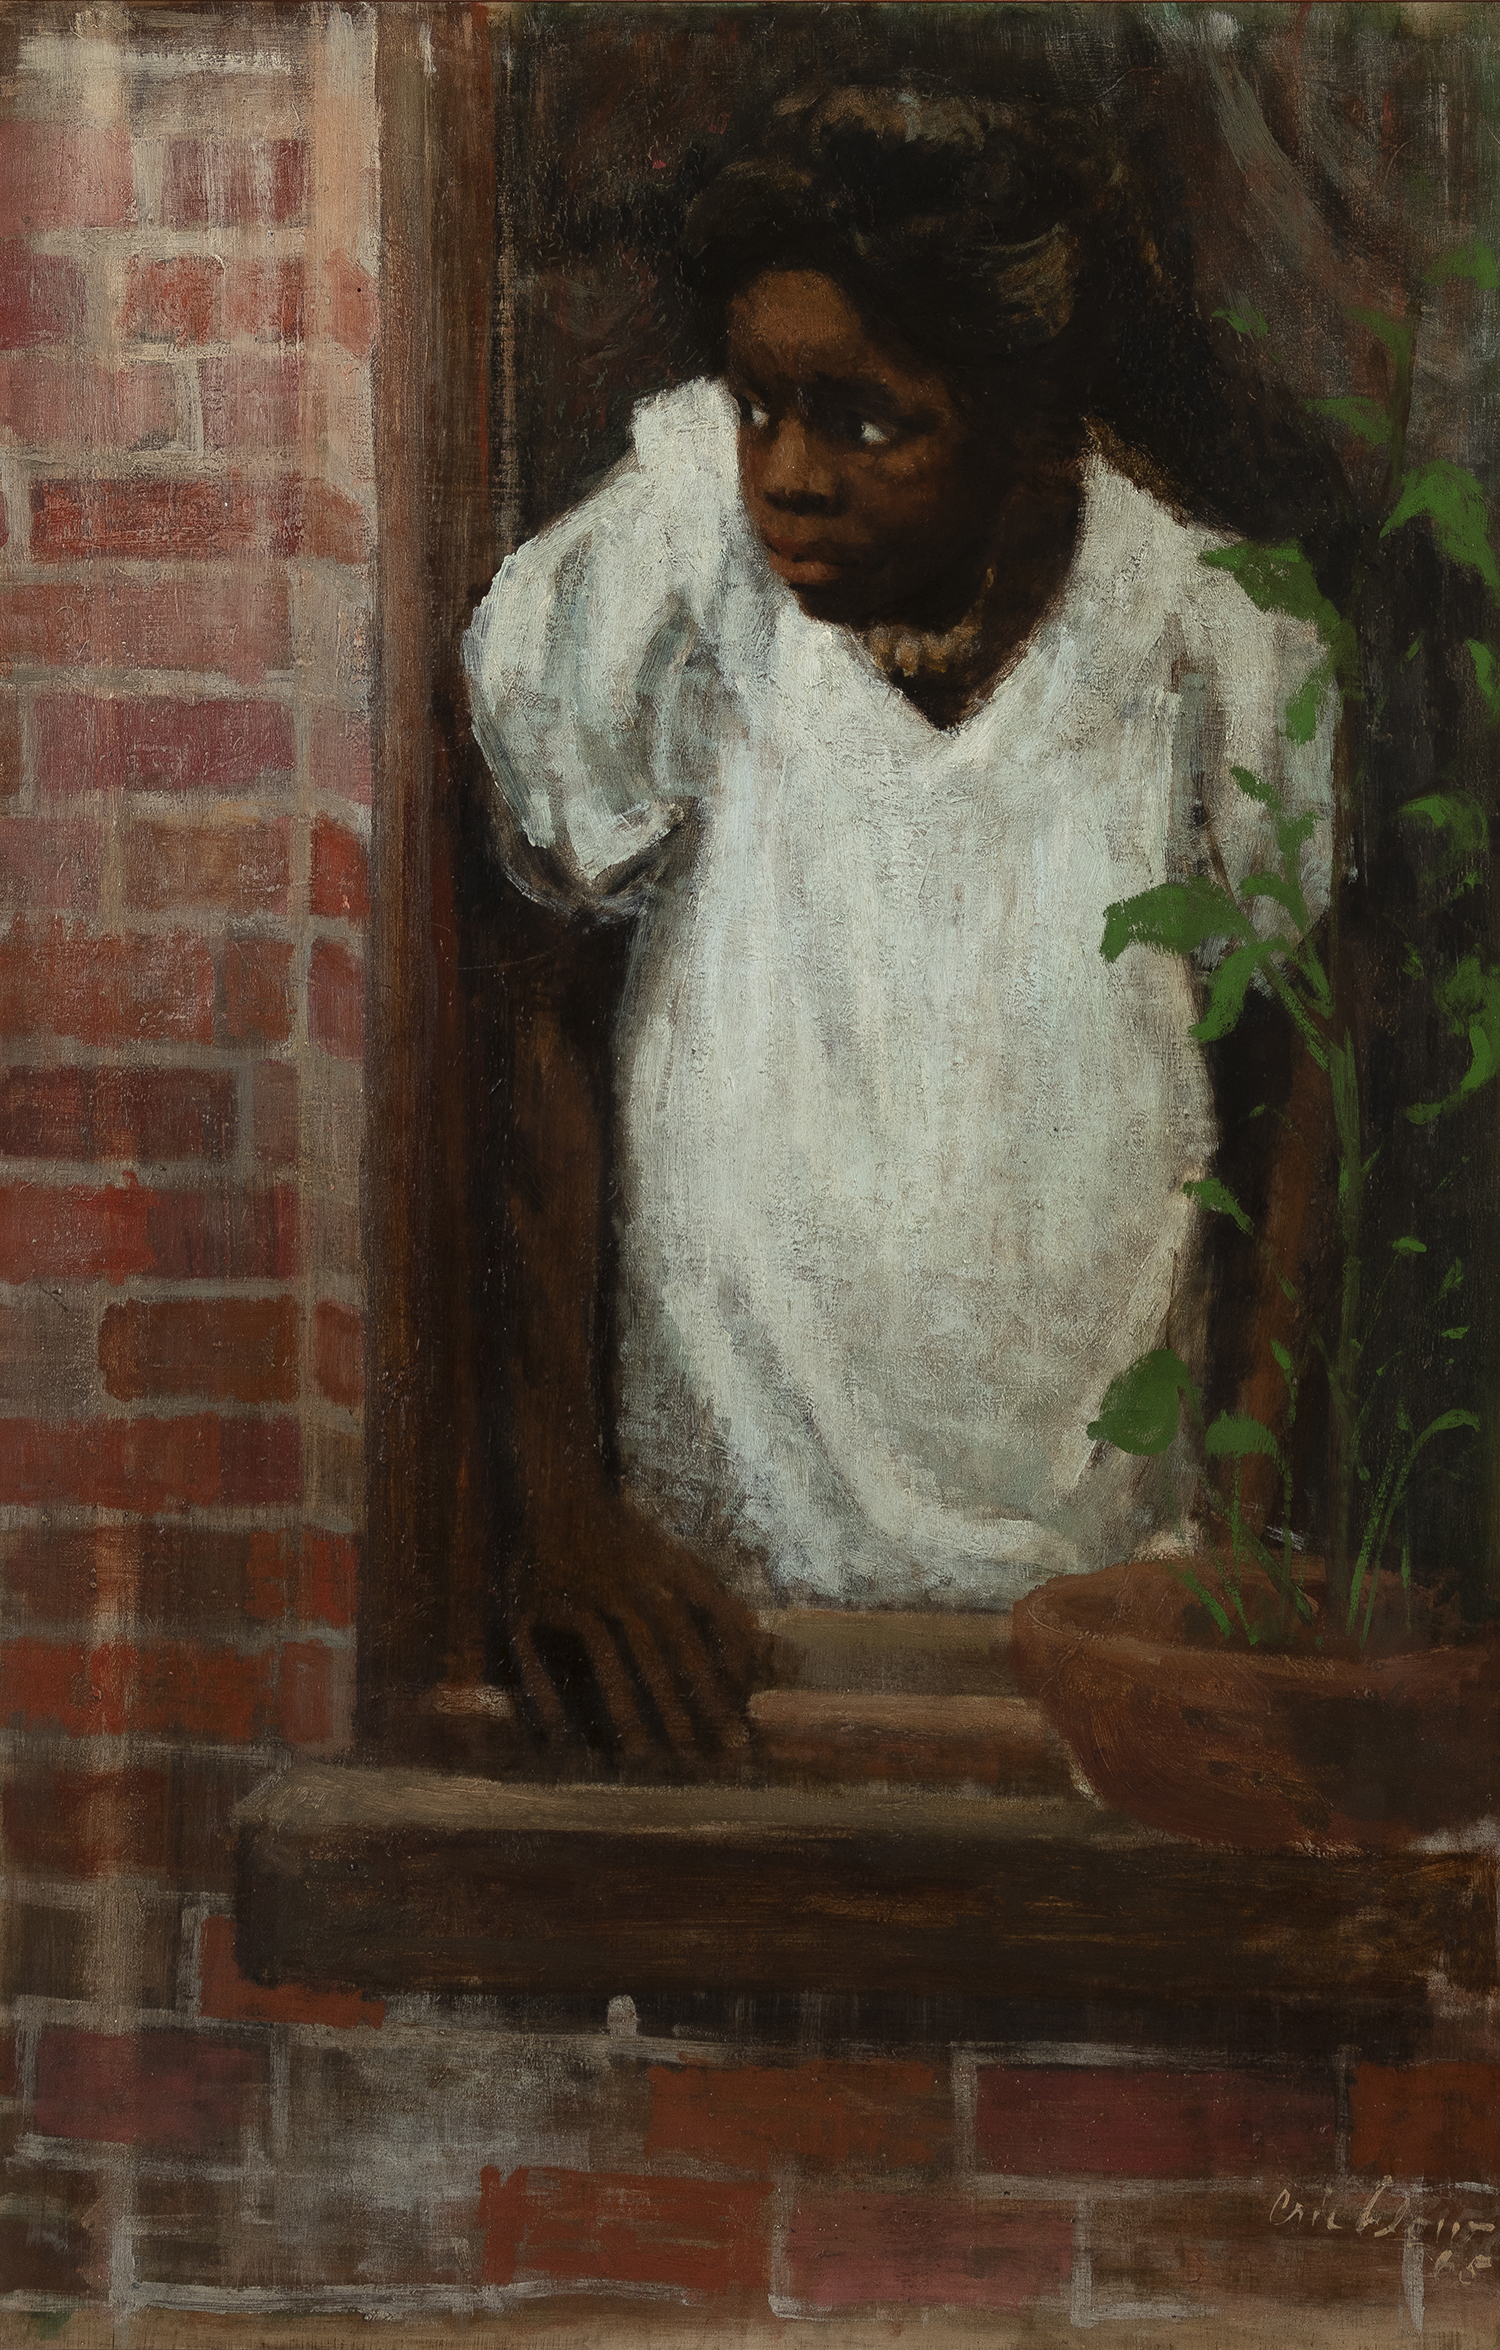 A Painting By Ernest Crichlow With A Girl At The Window.